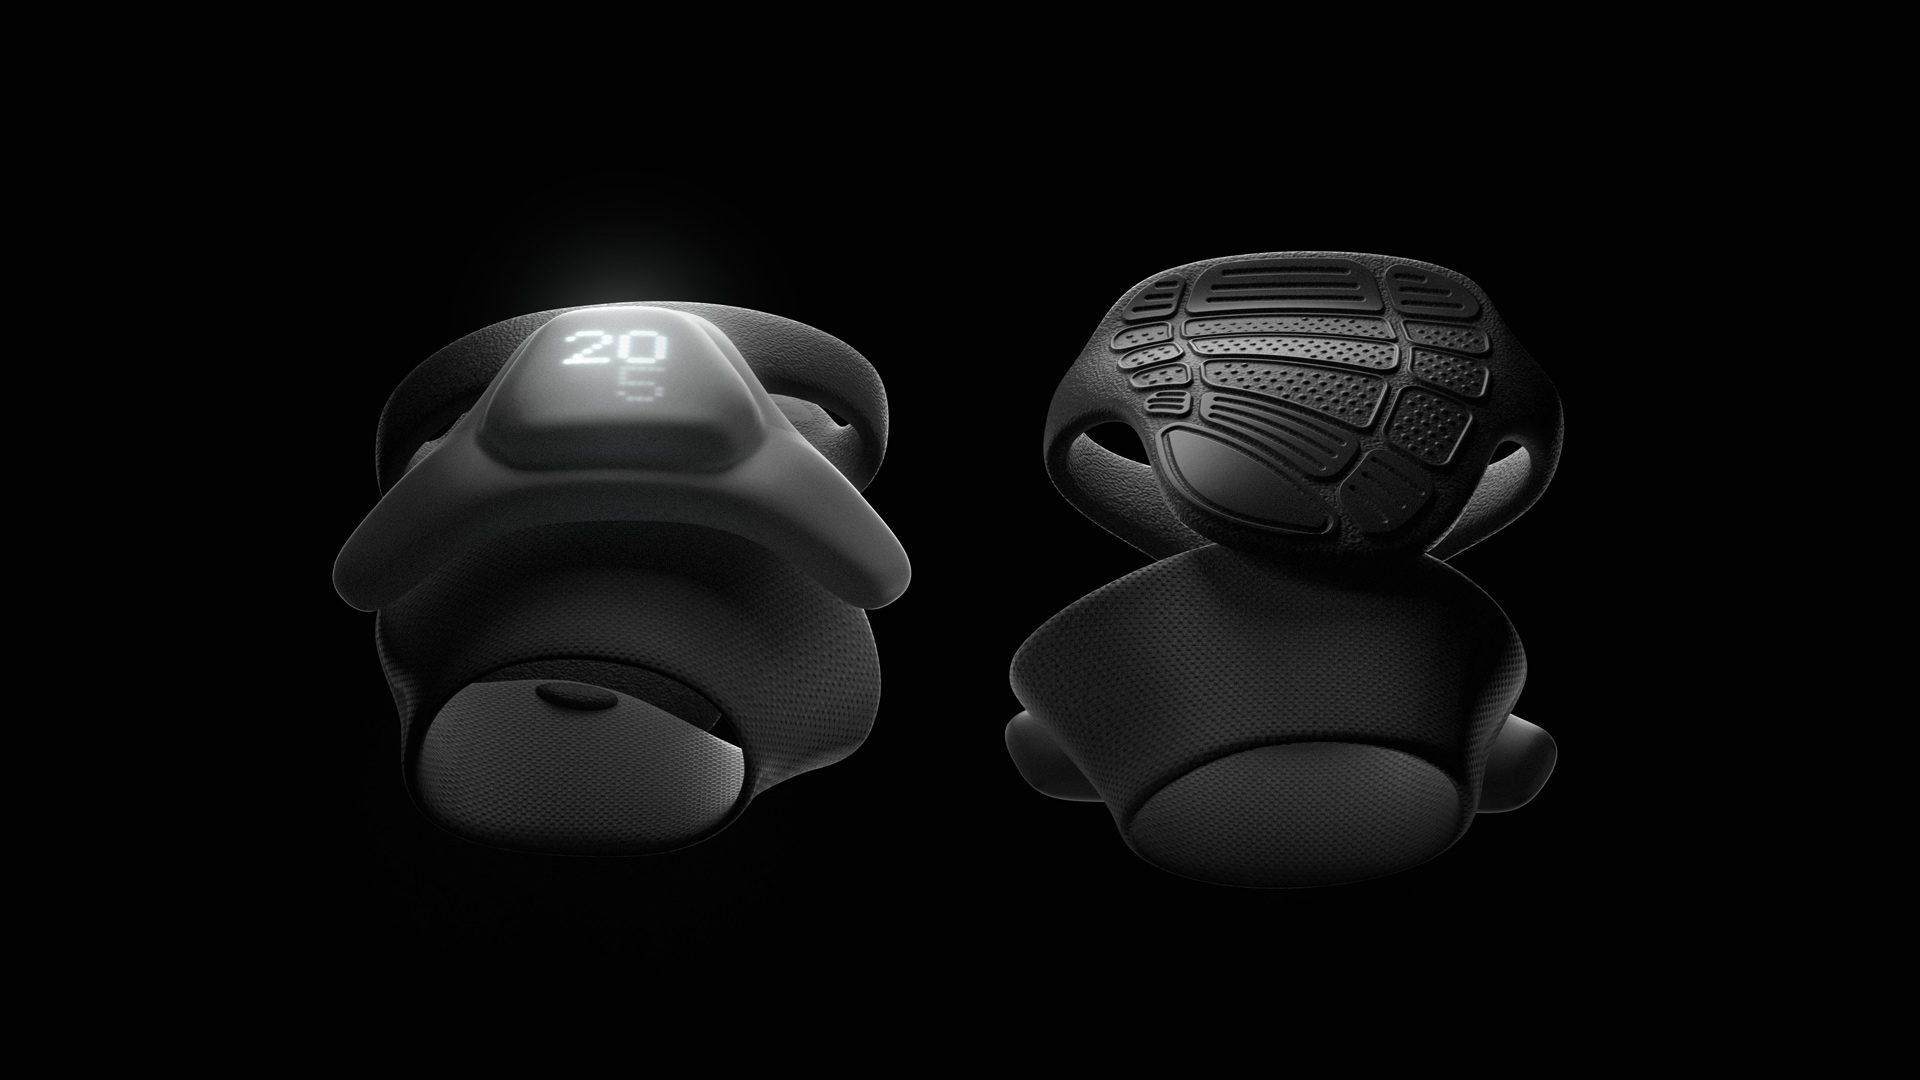 Fitness Startup Vi Wants You to Build Muscle with Its XR Gloves & Headset